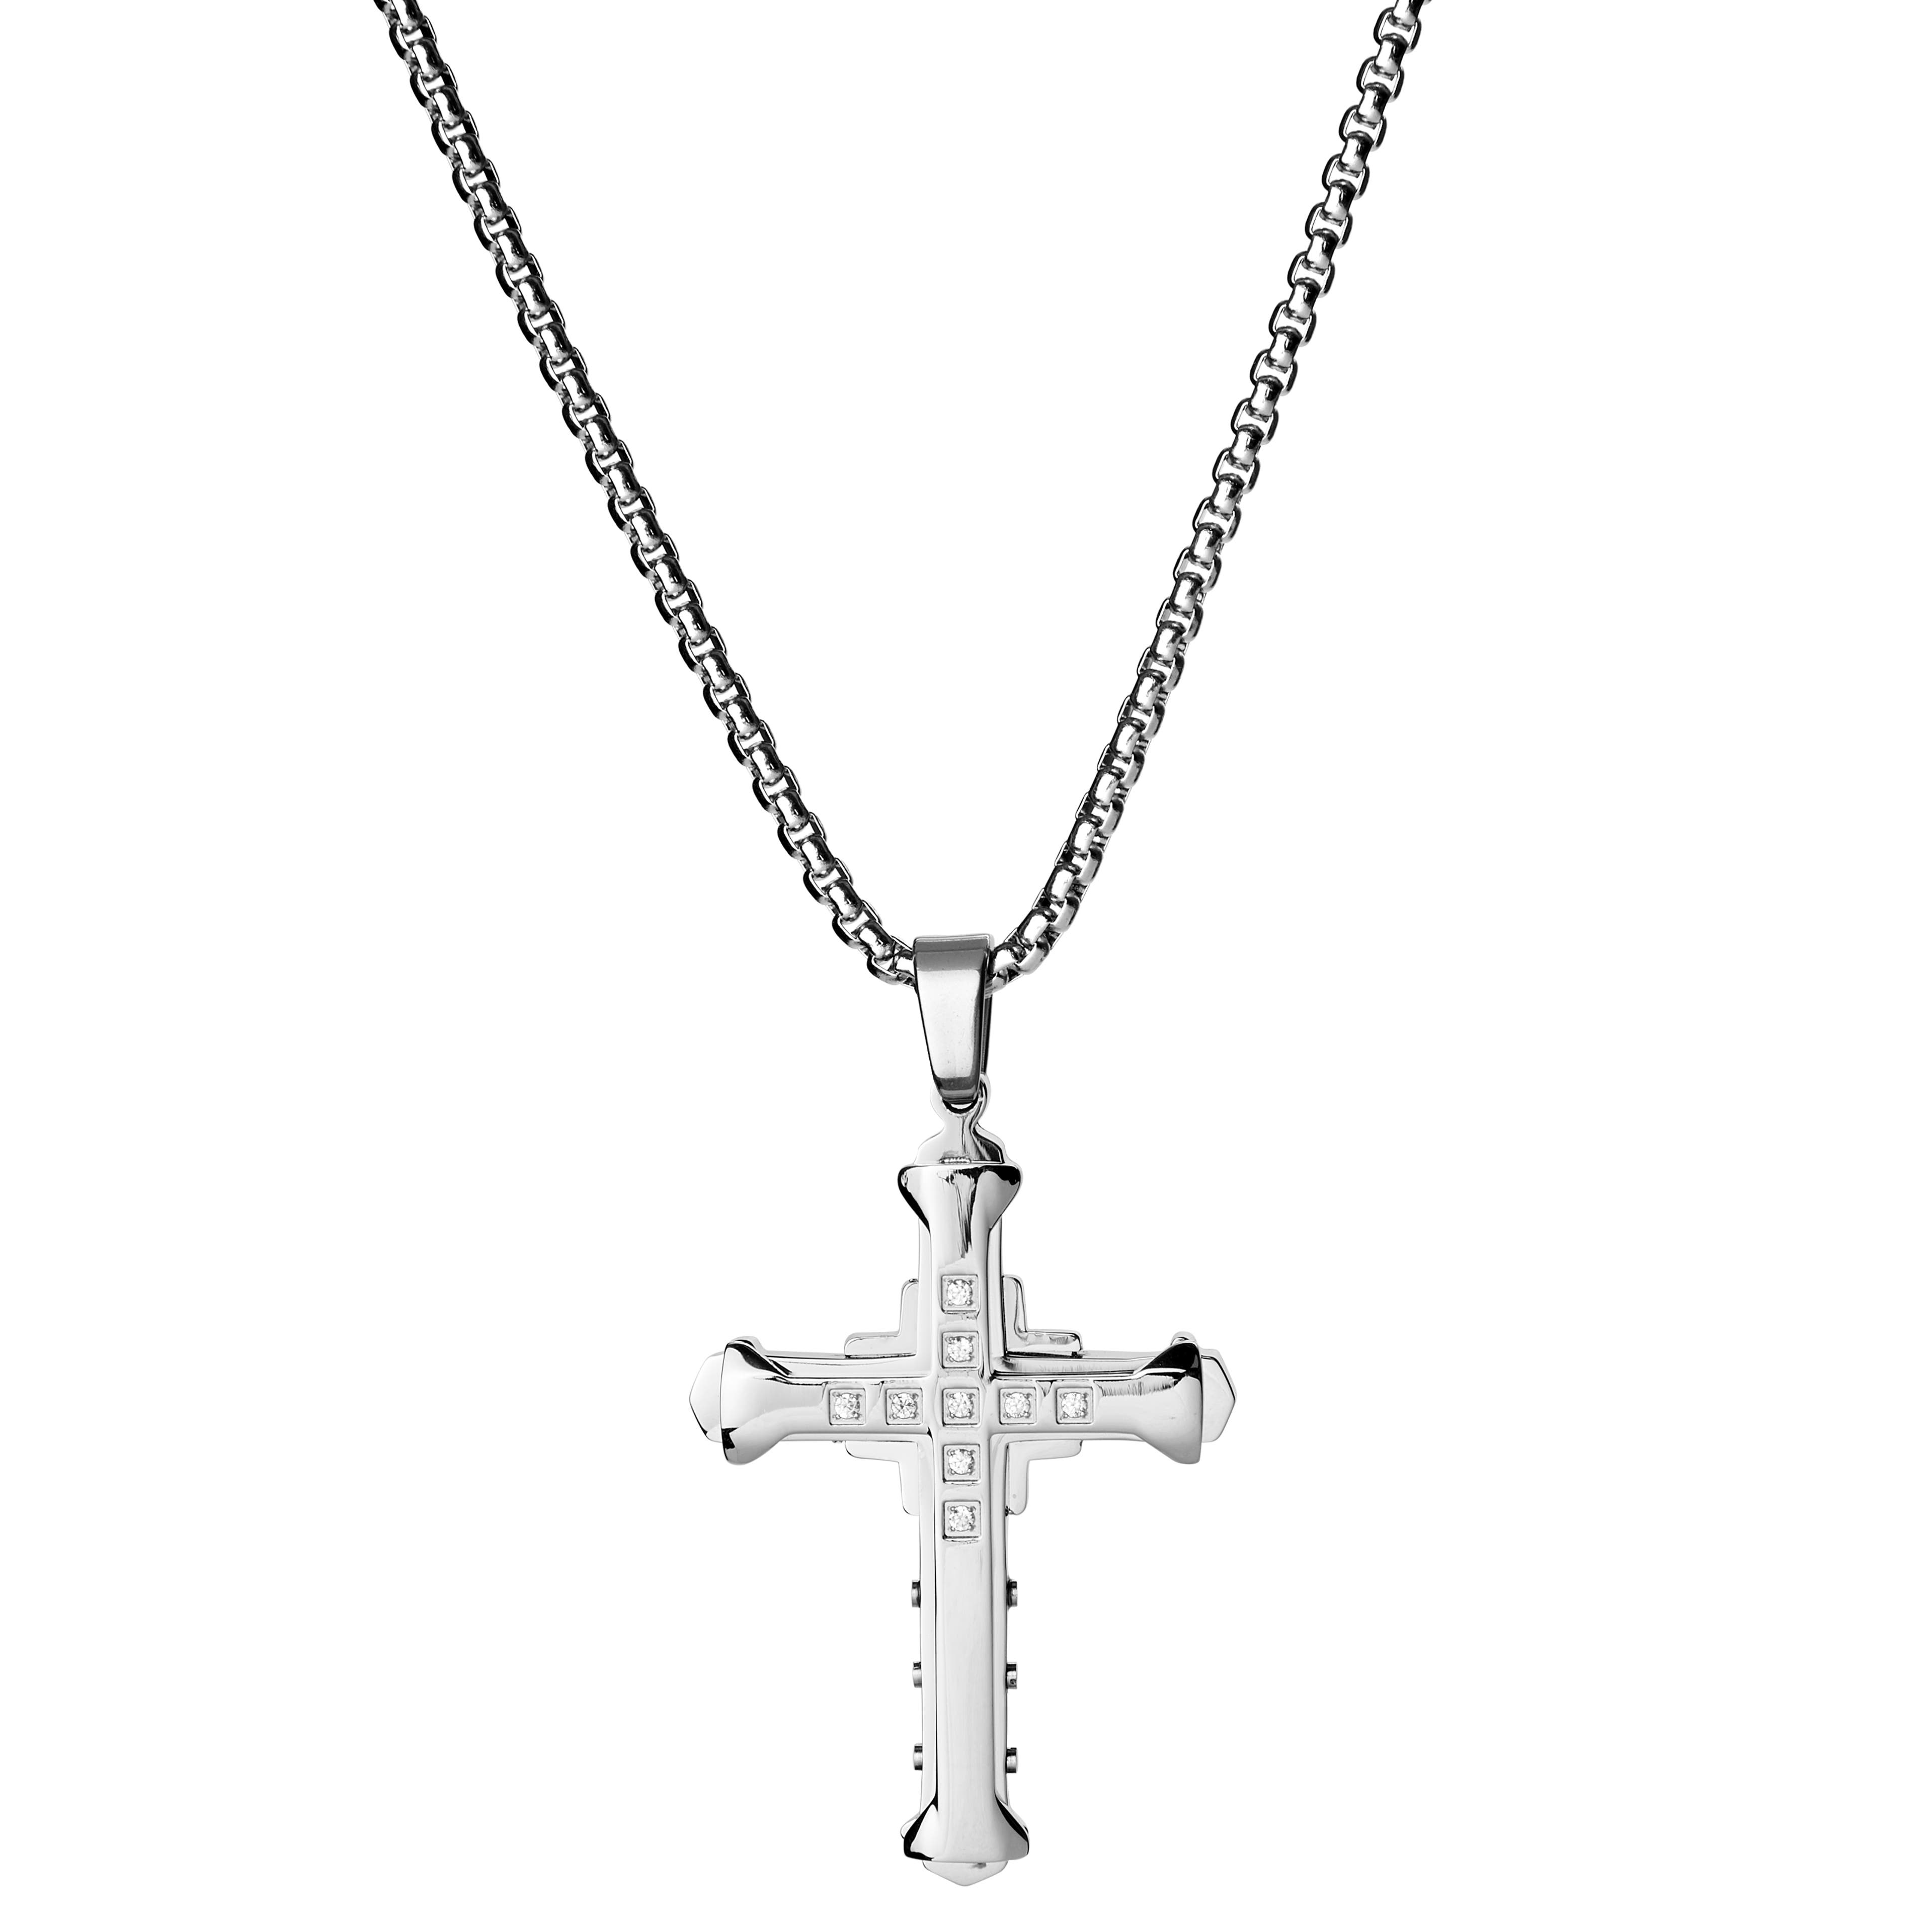 Studded Layered Cross Necklace